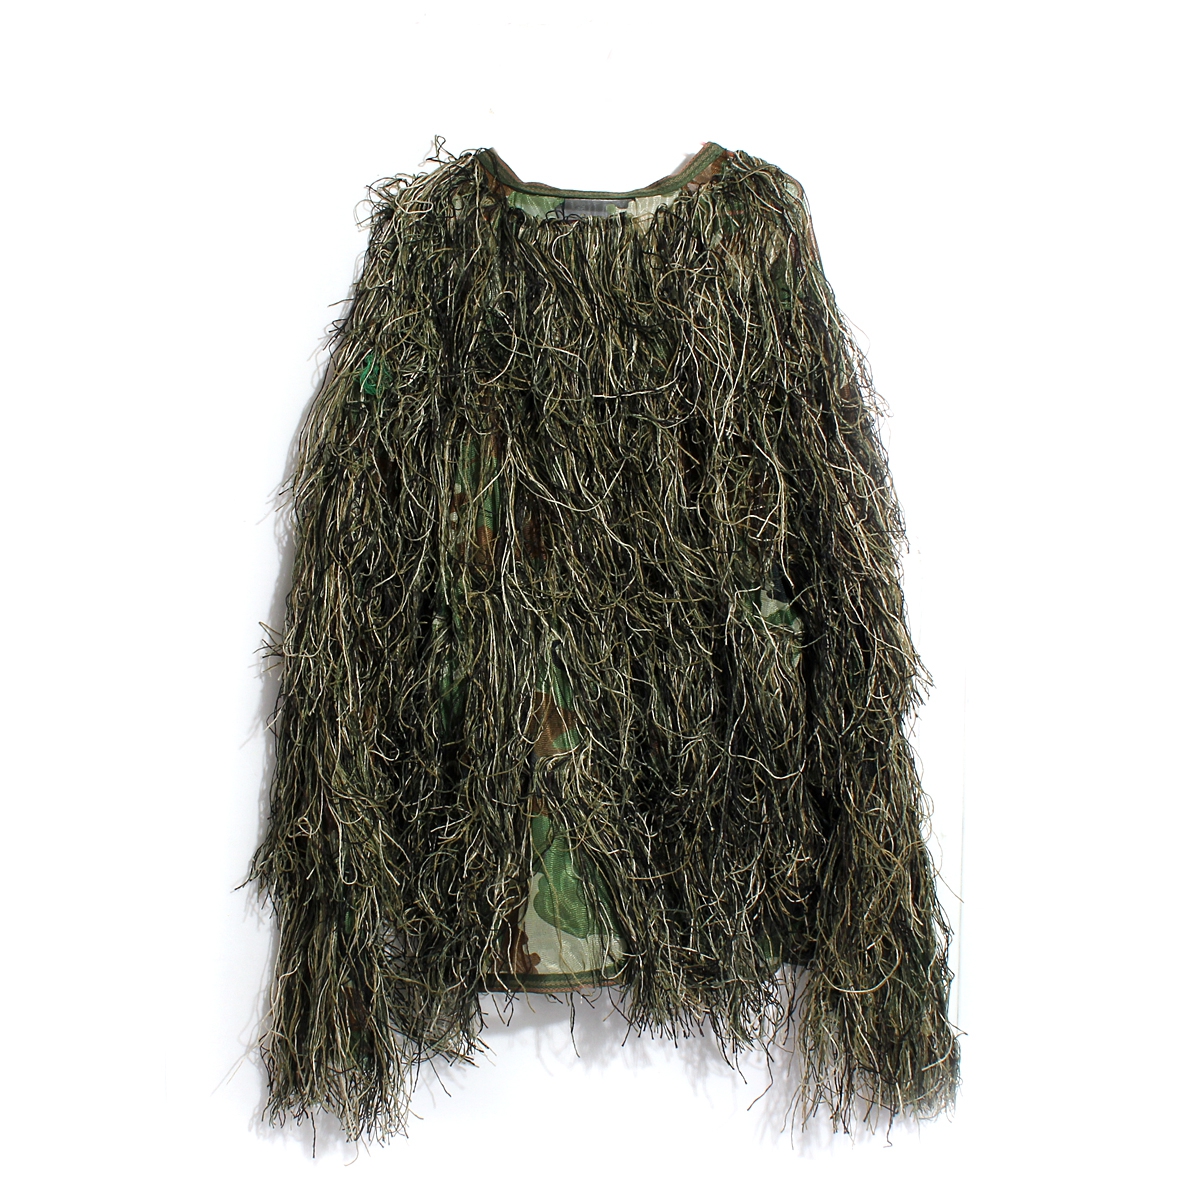 Ghillie Suit Camo 3D Woodland Camouflage Forest Hunting Hide Camping ...